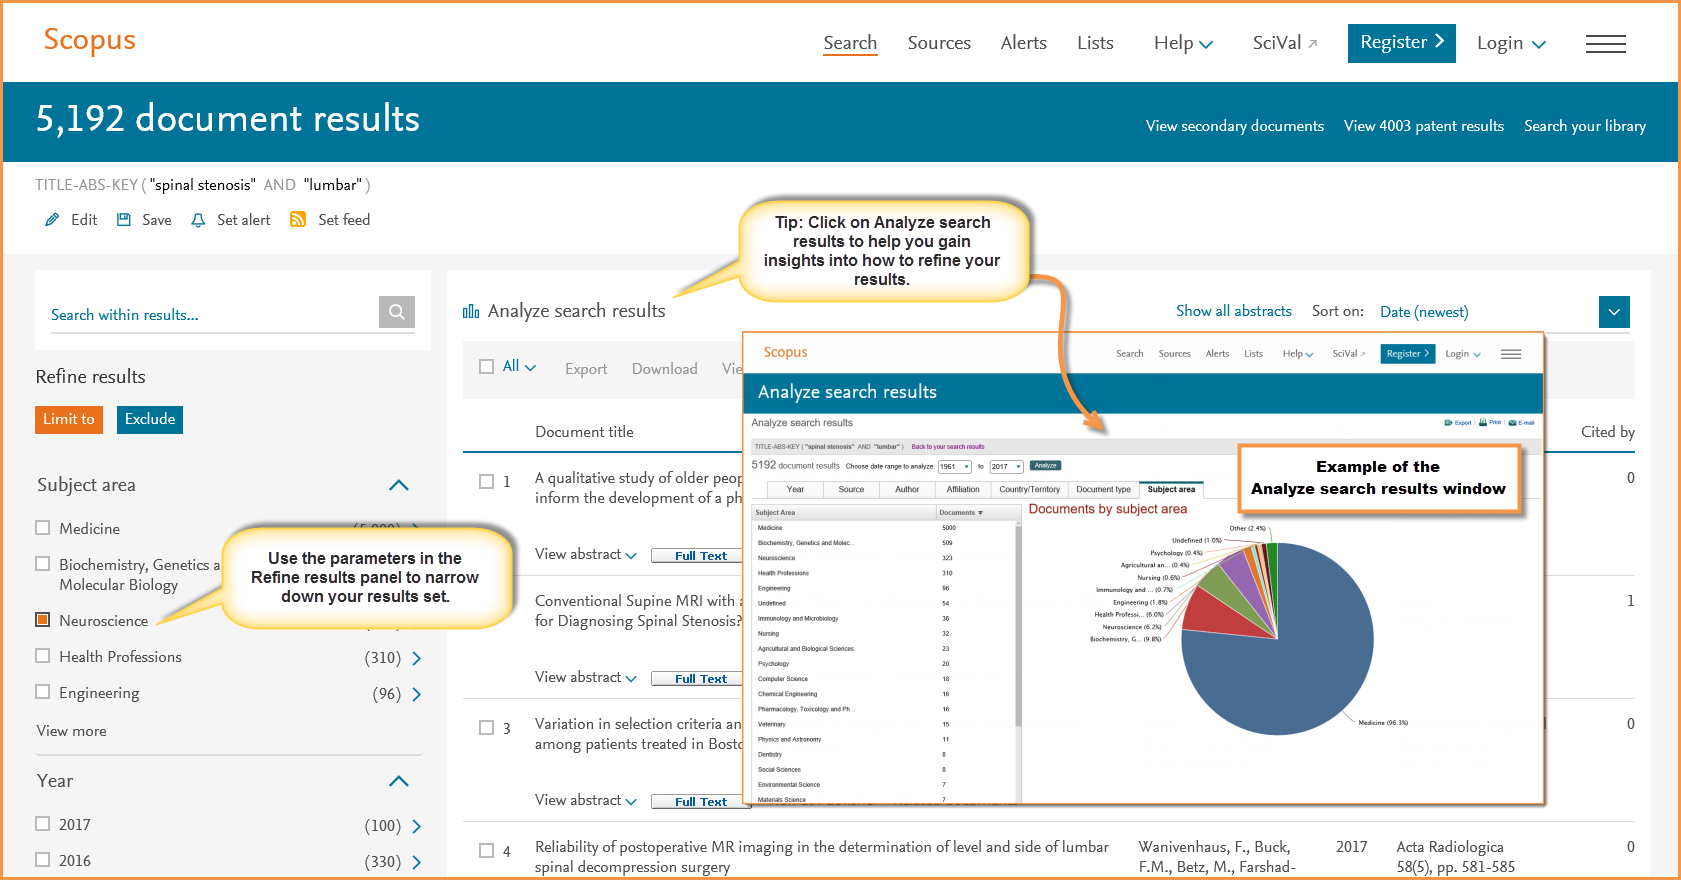 Figure showing an example of the Scopus document results and how to refine your search